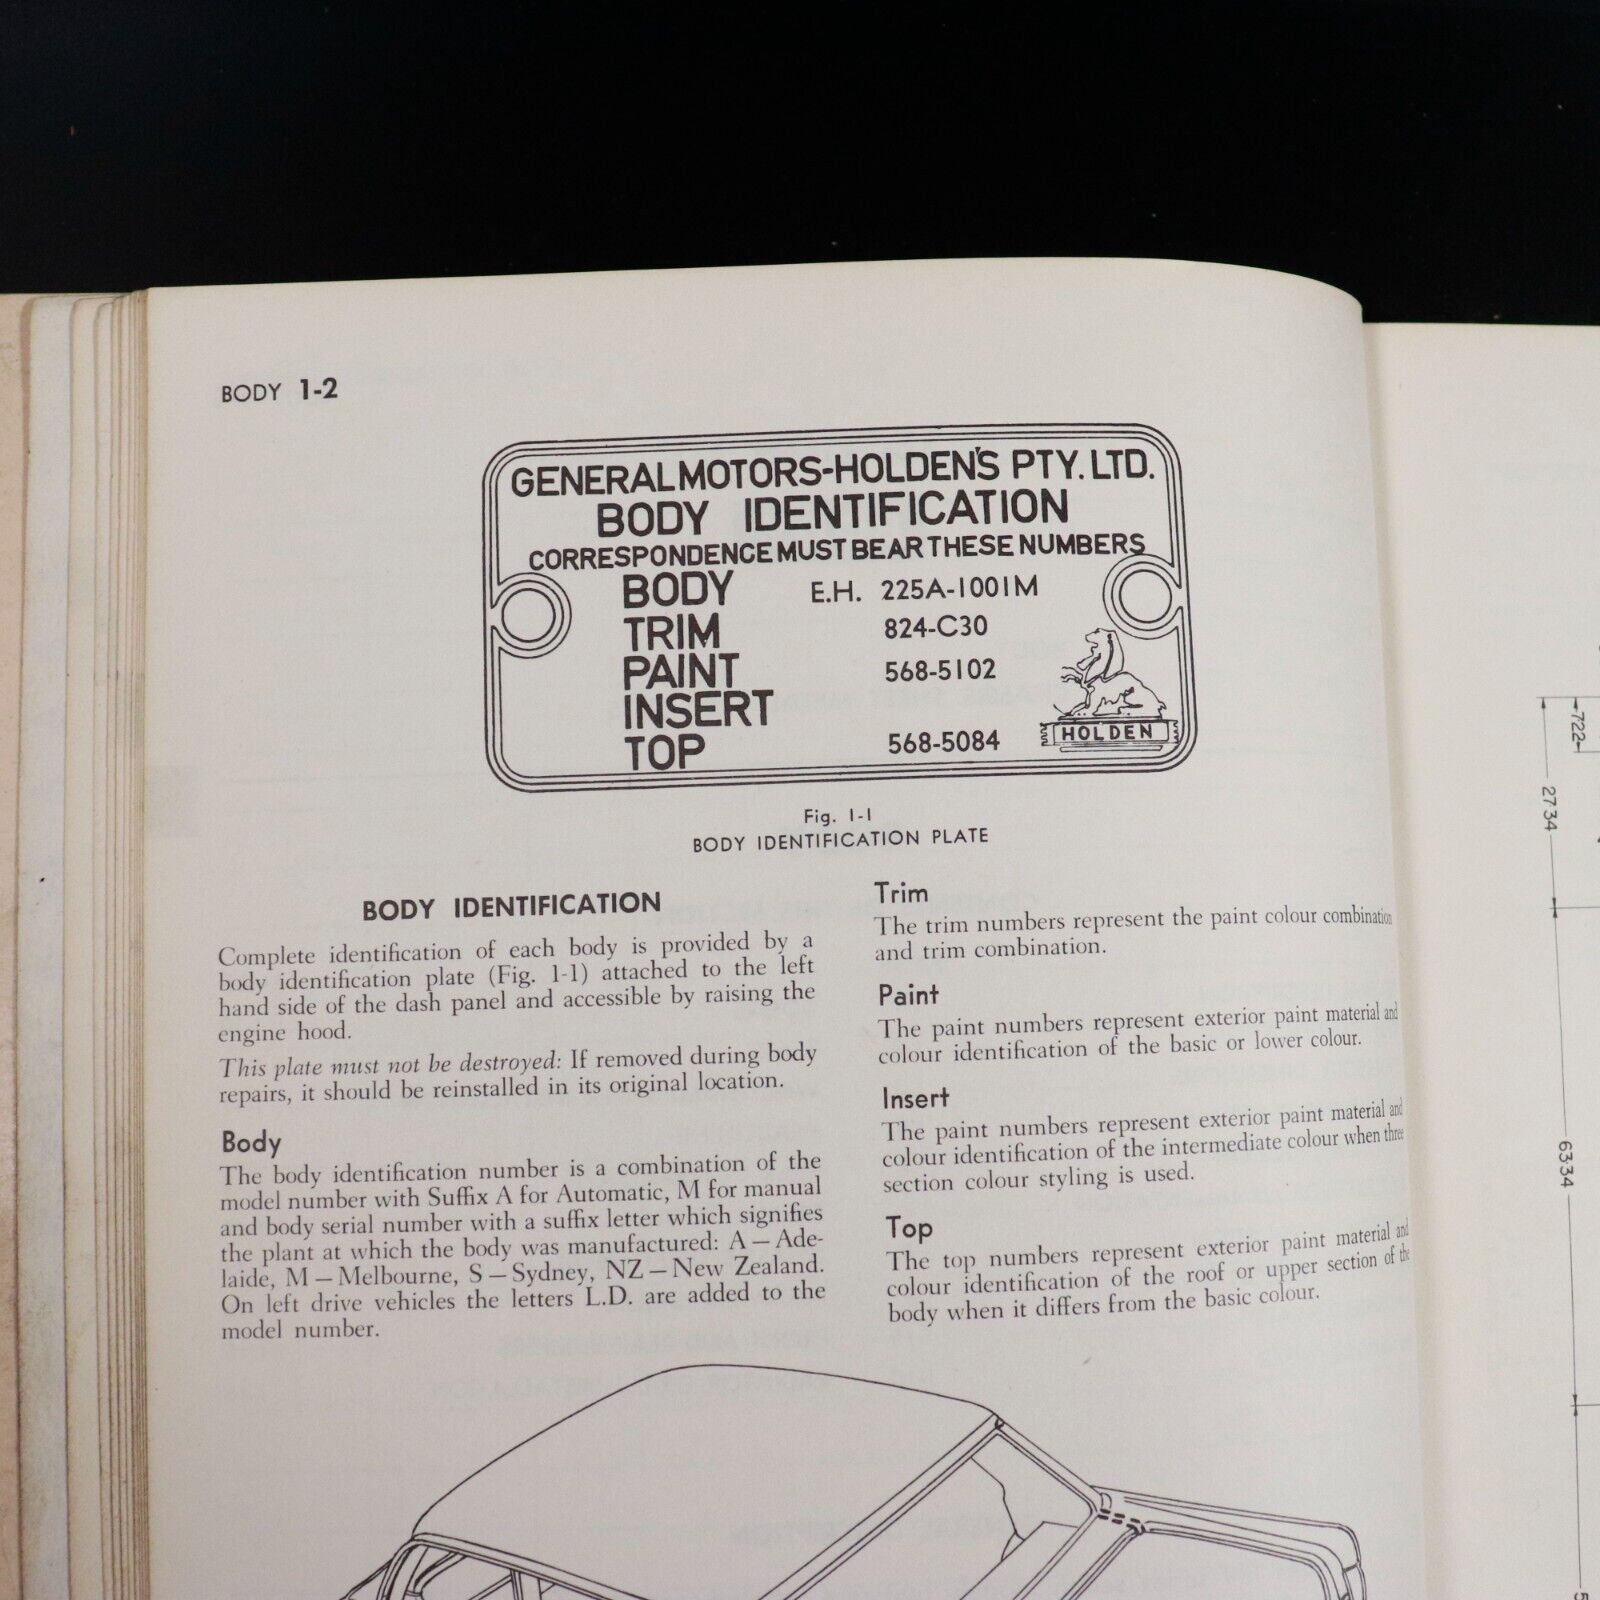 c1965 Holden Shop Manual Supplement 'EH' Series GMH Workshop Auto Reference Book